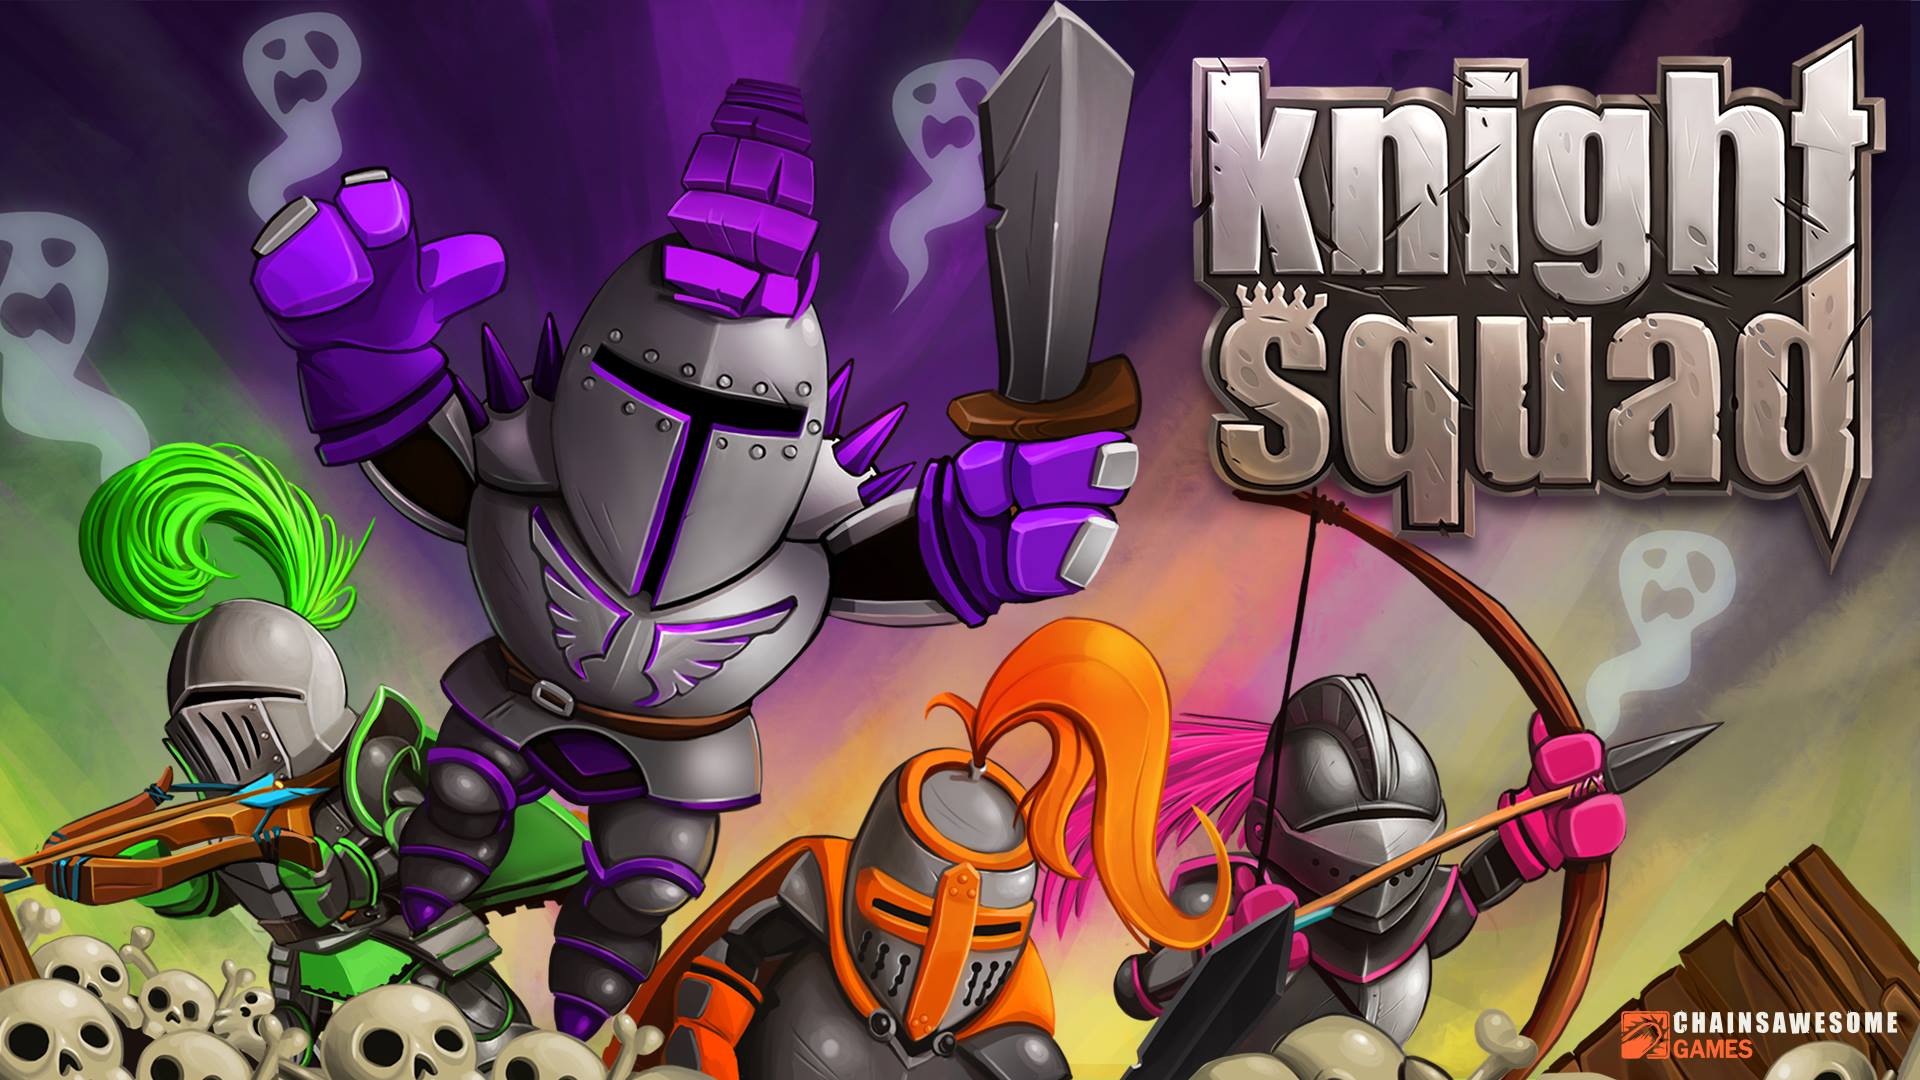 Download Latest HD Wallpaper of, Games, Knight Squad